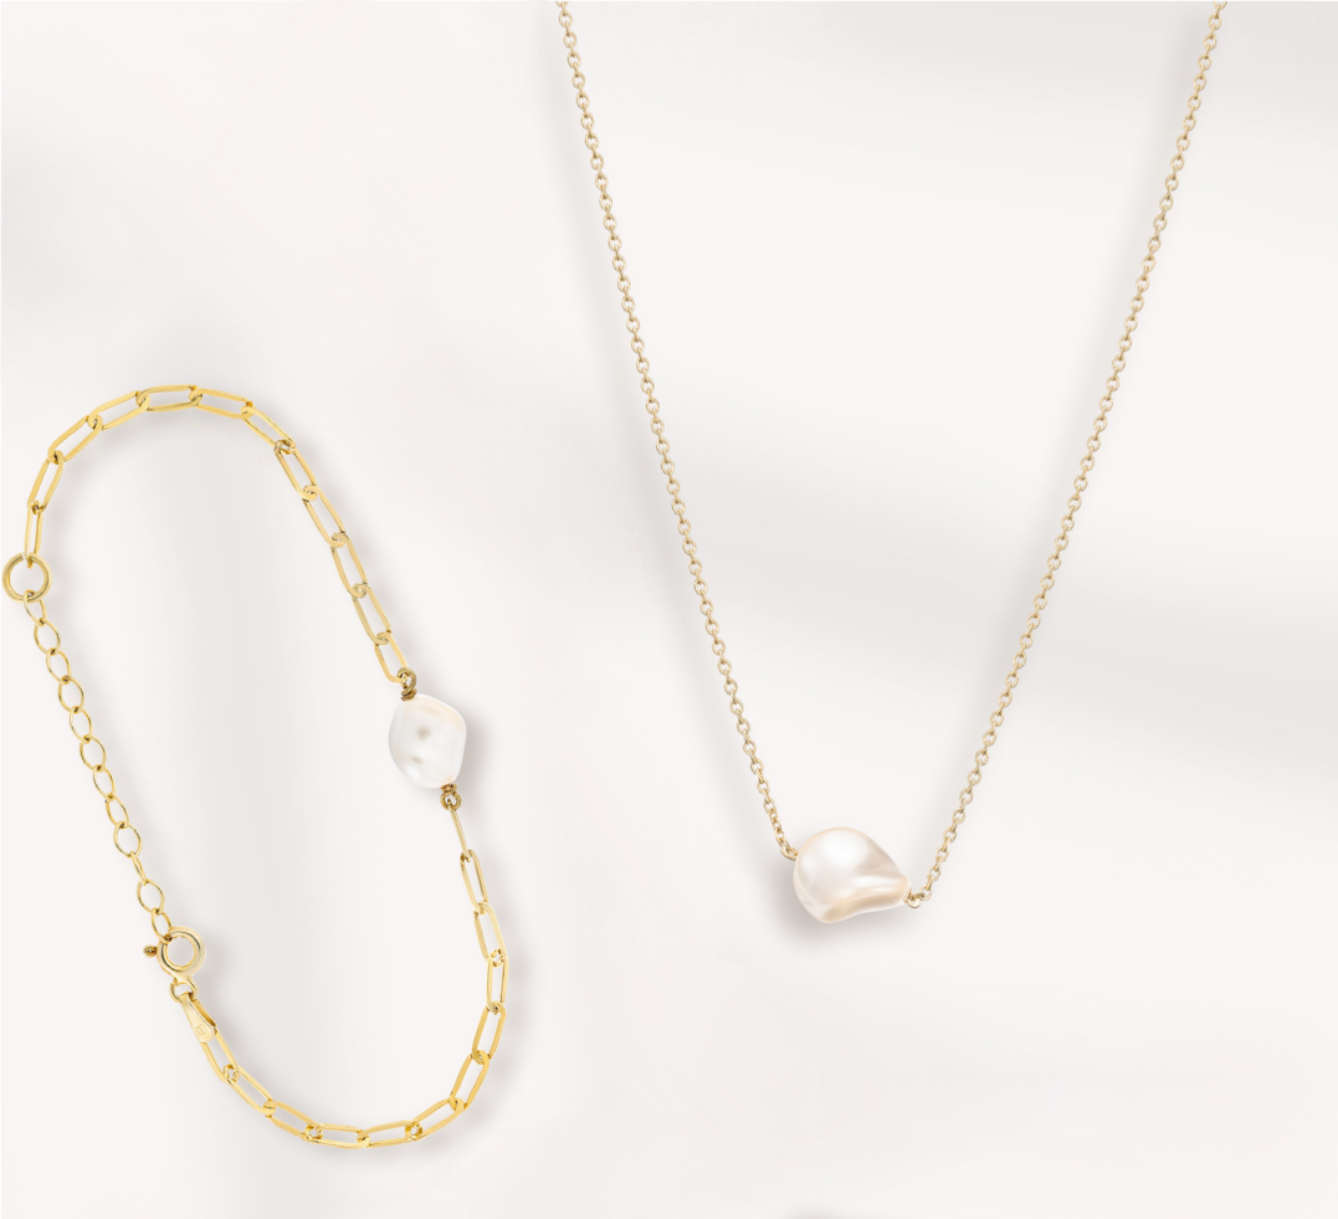 Jewellery Set, La Dune Necklace, Chain Necklace, 18k Gold Plated Necklace, 18k Pure Gold Necklace, Silver 925 Necklace, Long Necklace, Handmade, Pearly Crystal, Dune Shaped Crystal, Chain Bracelet, 18k Gold Plated Bracelet, 18k Pure Gold Bracelet, Silver 925 Bracelet,Pearly Crystal, Dune Shaped Crystal